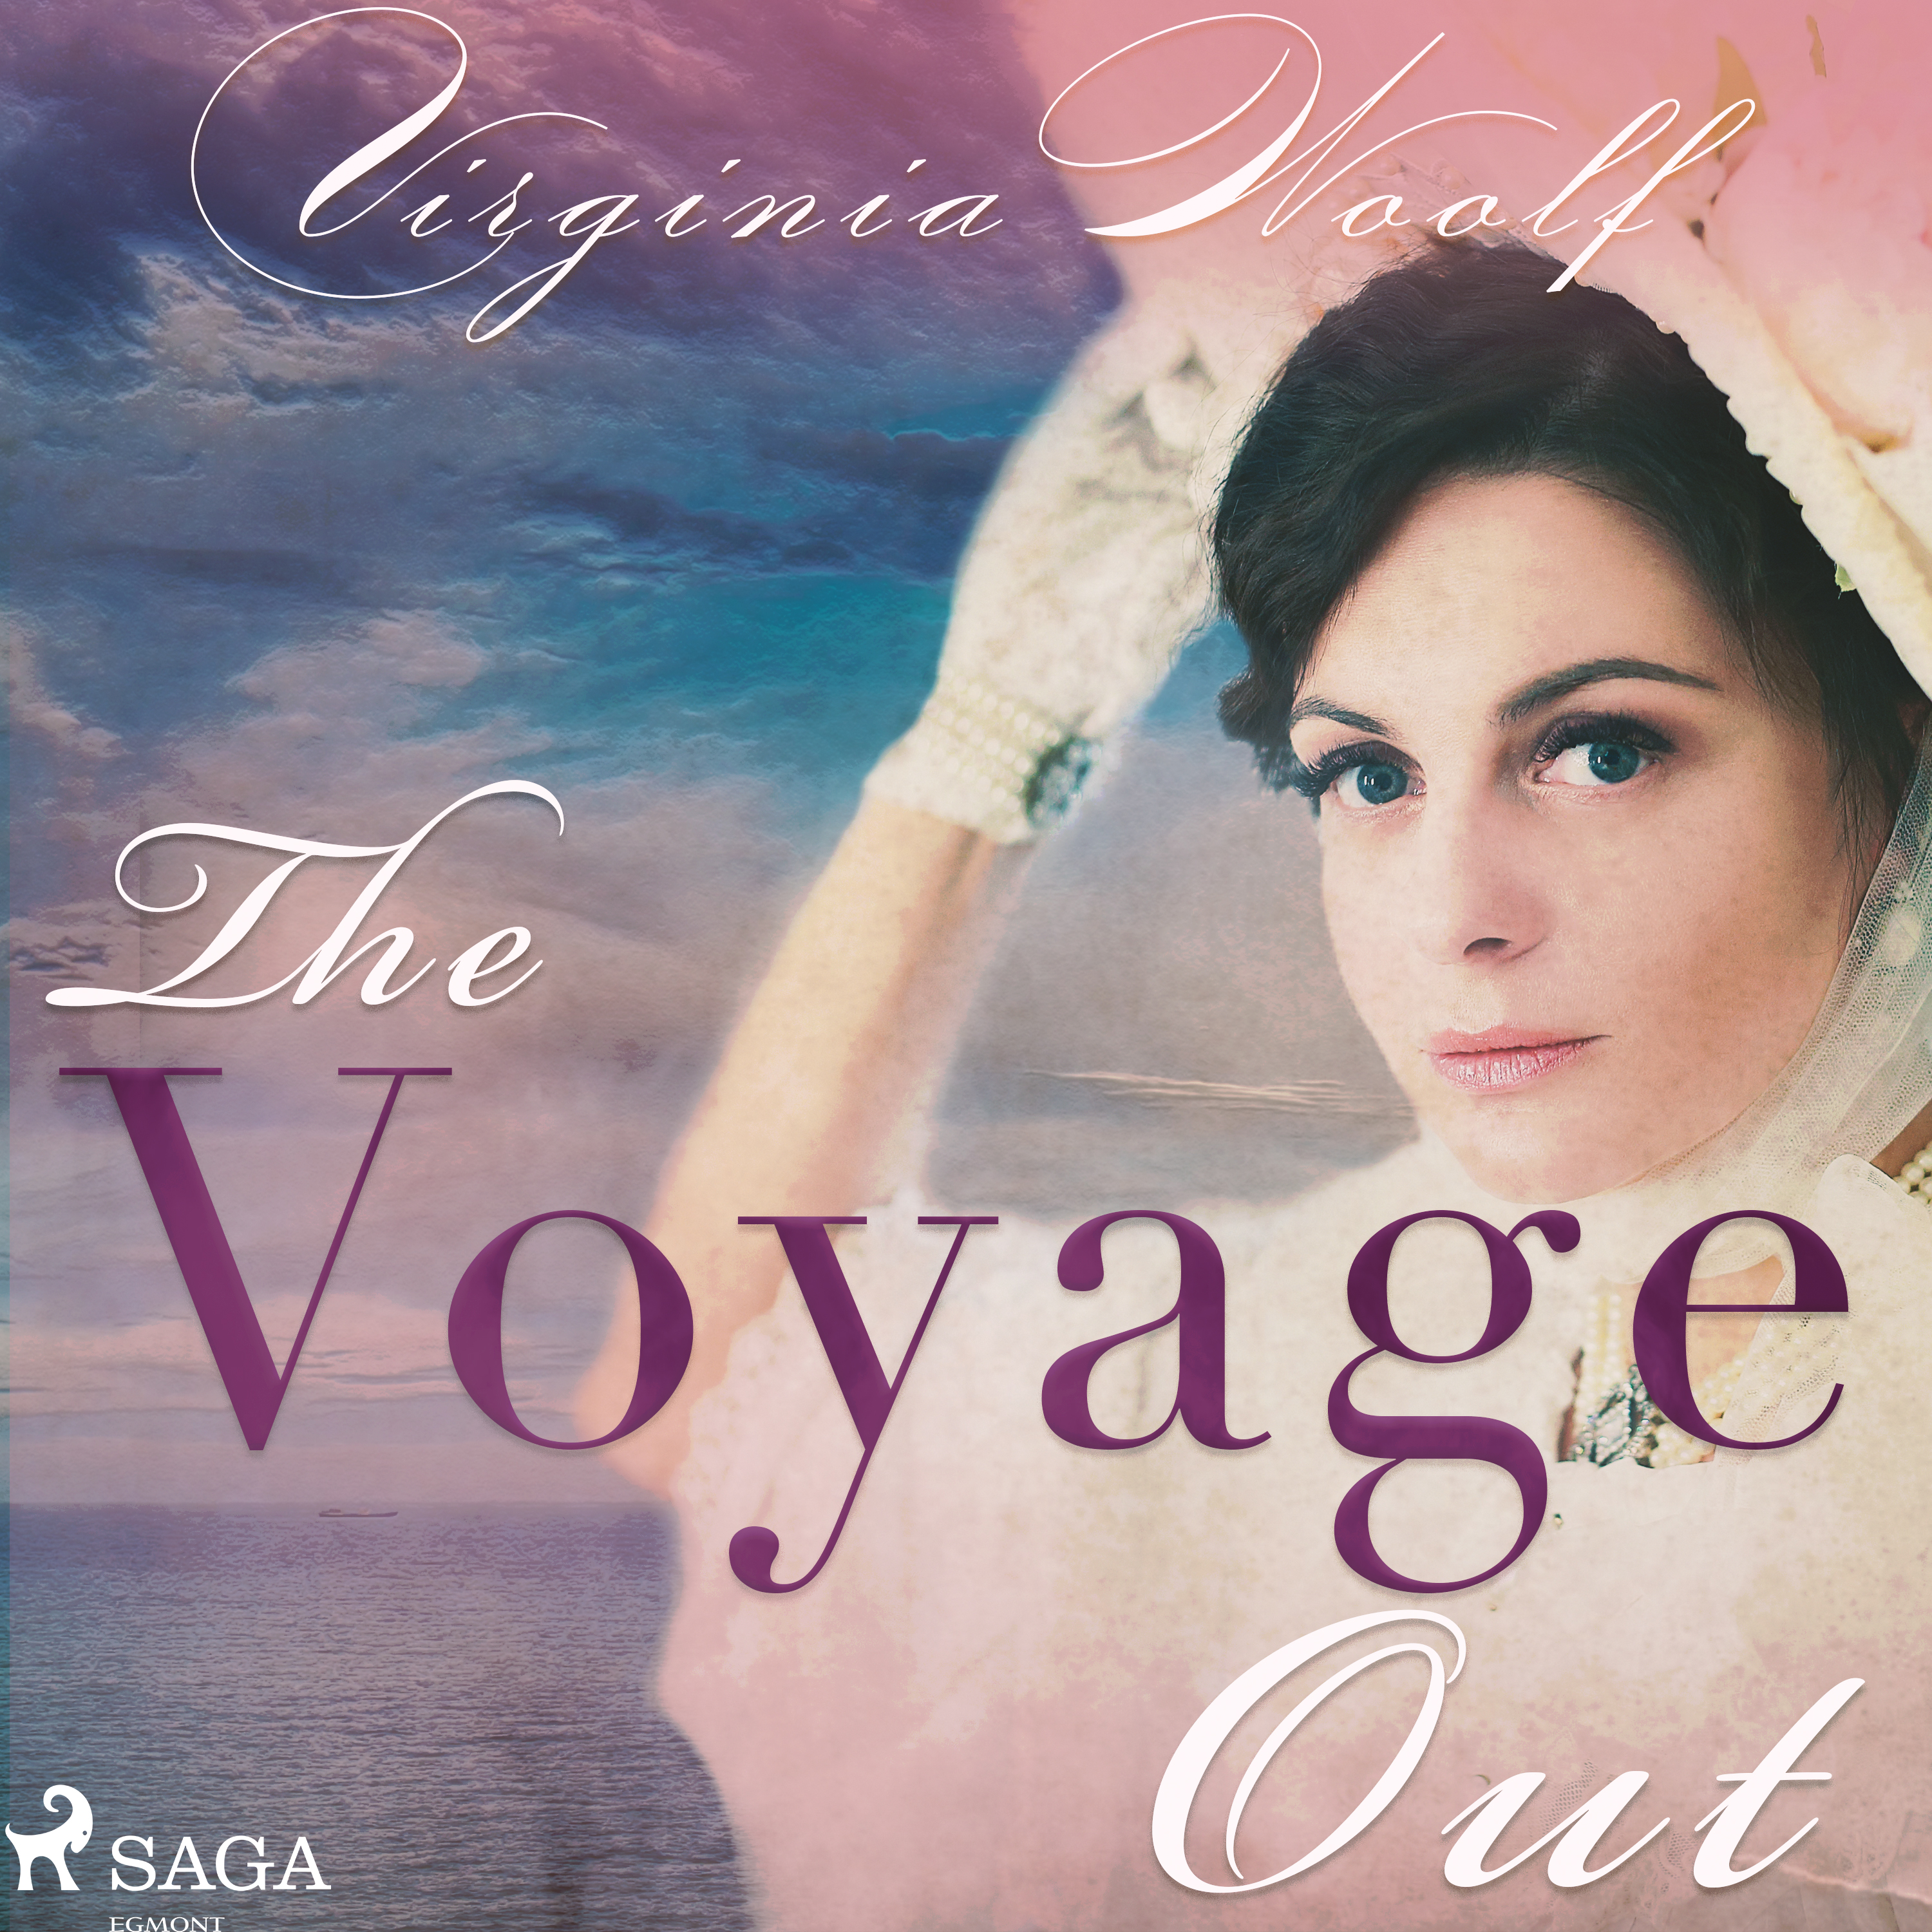 the voyage out by virginia woolf